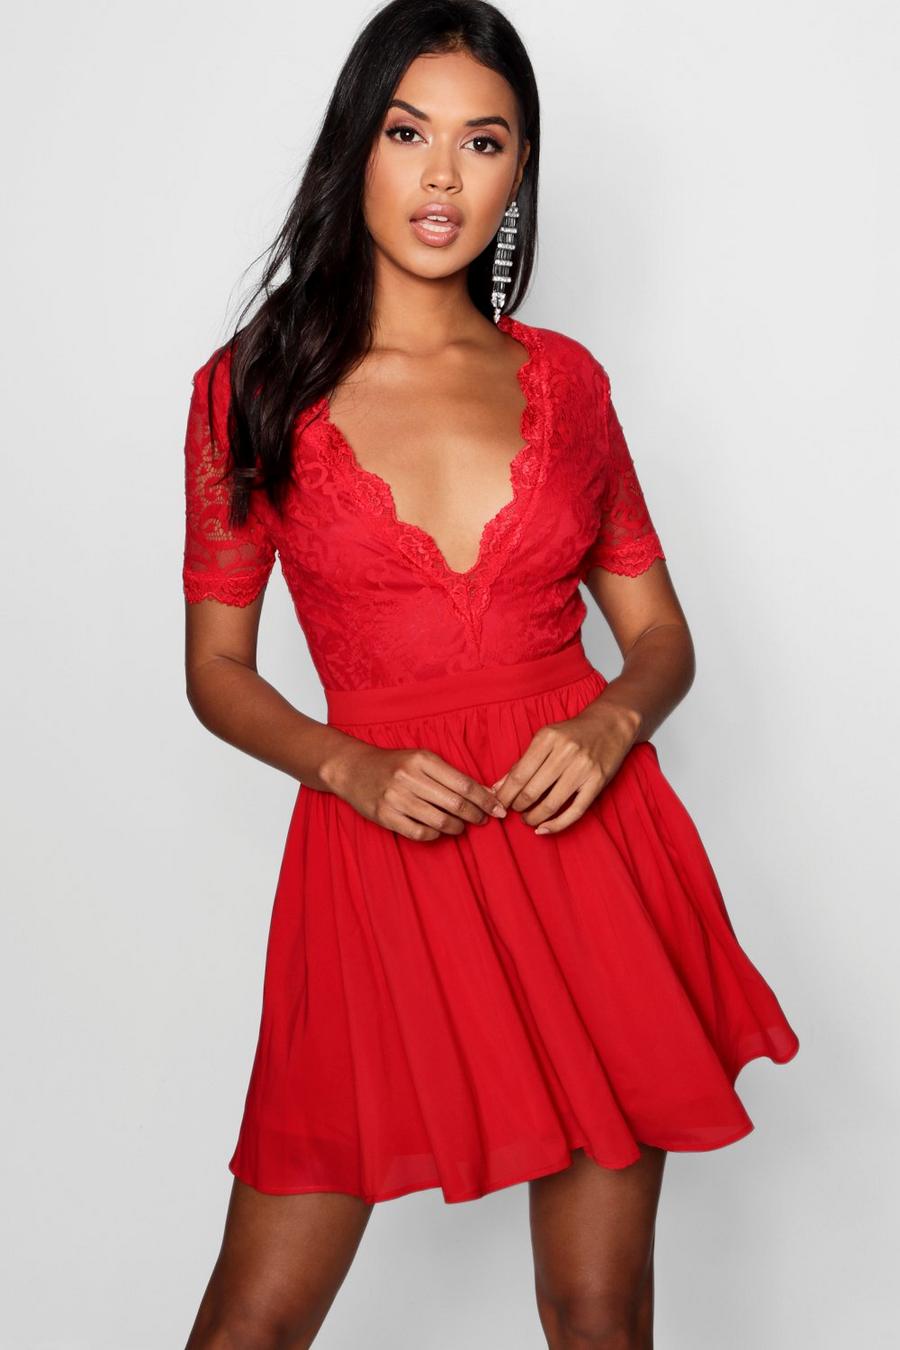 Red Lace Top Skater Dress